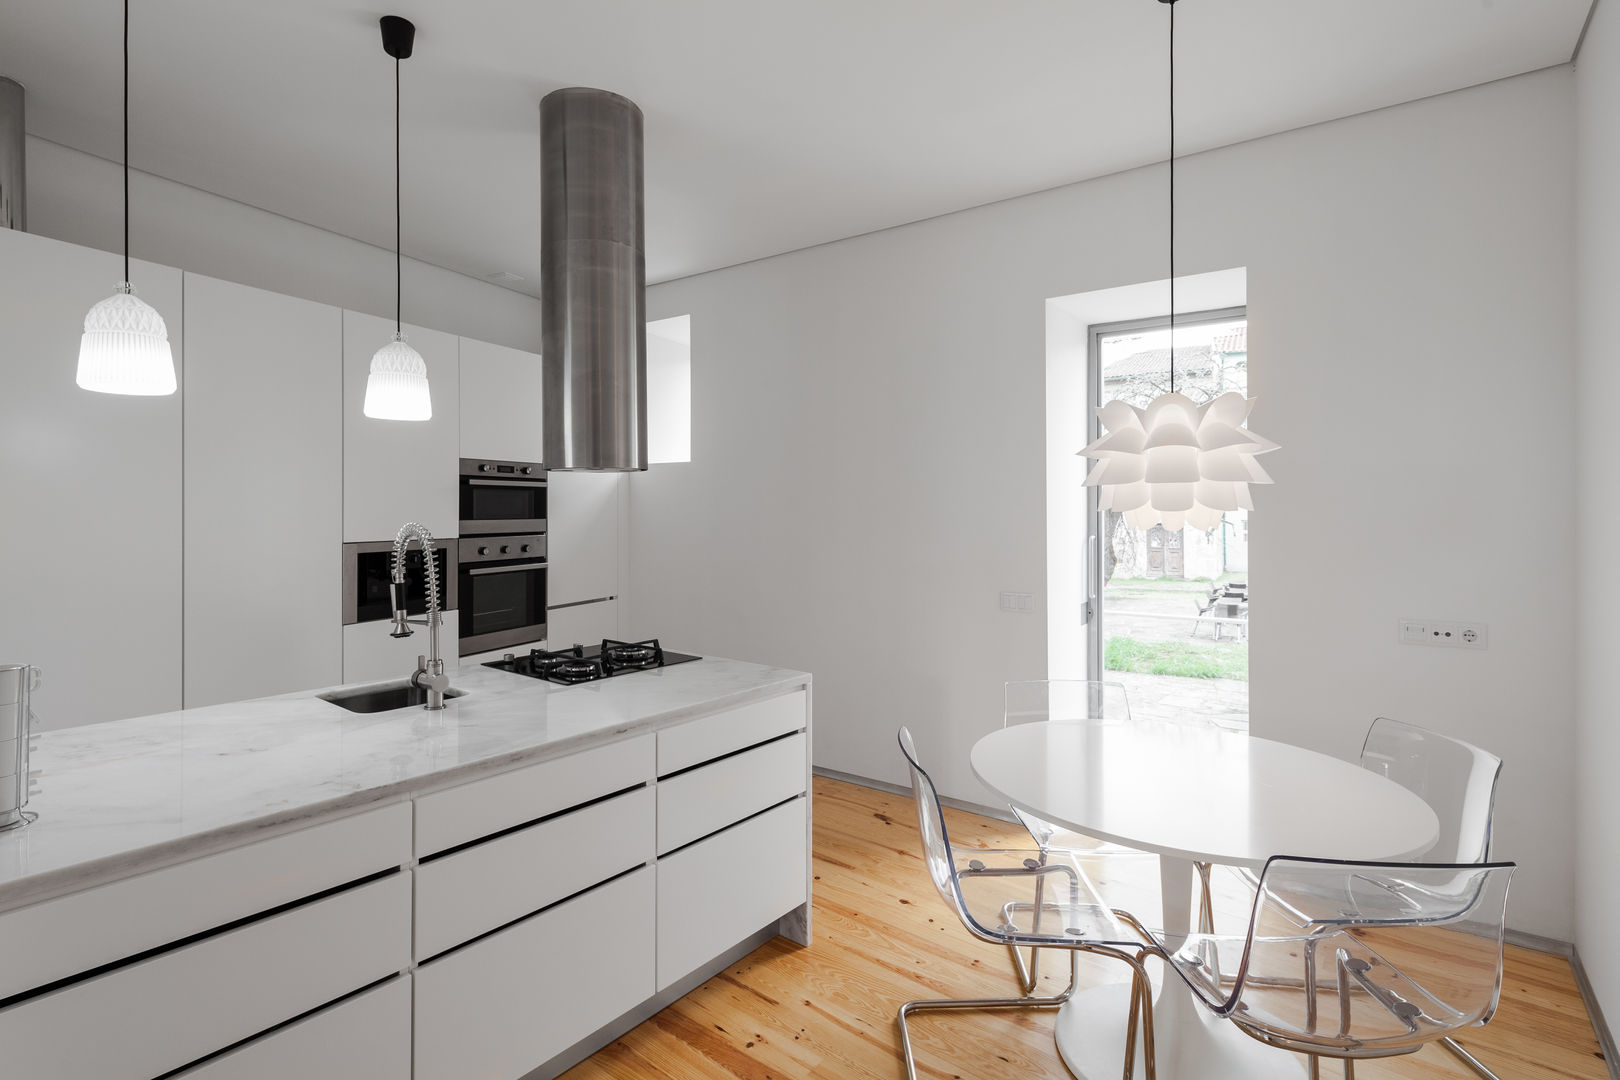 The Three Cusps Chalet, Tiago do Vale Arquitectos Tiago do Vale Arquitectos Kitchen